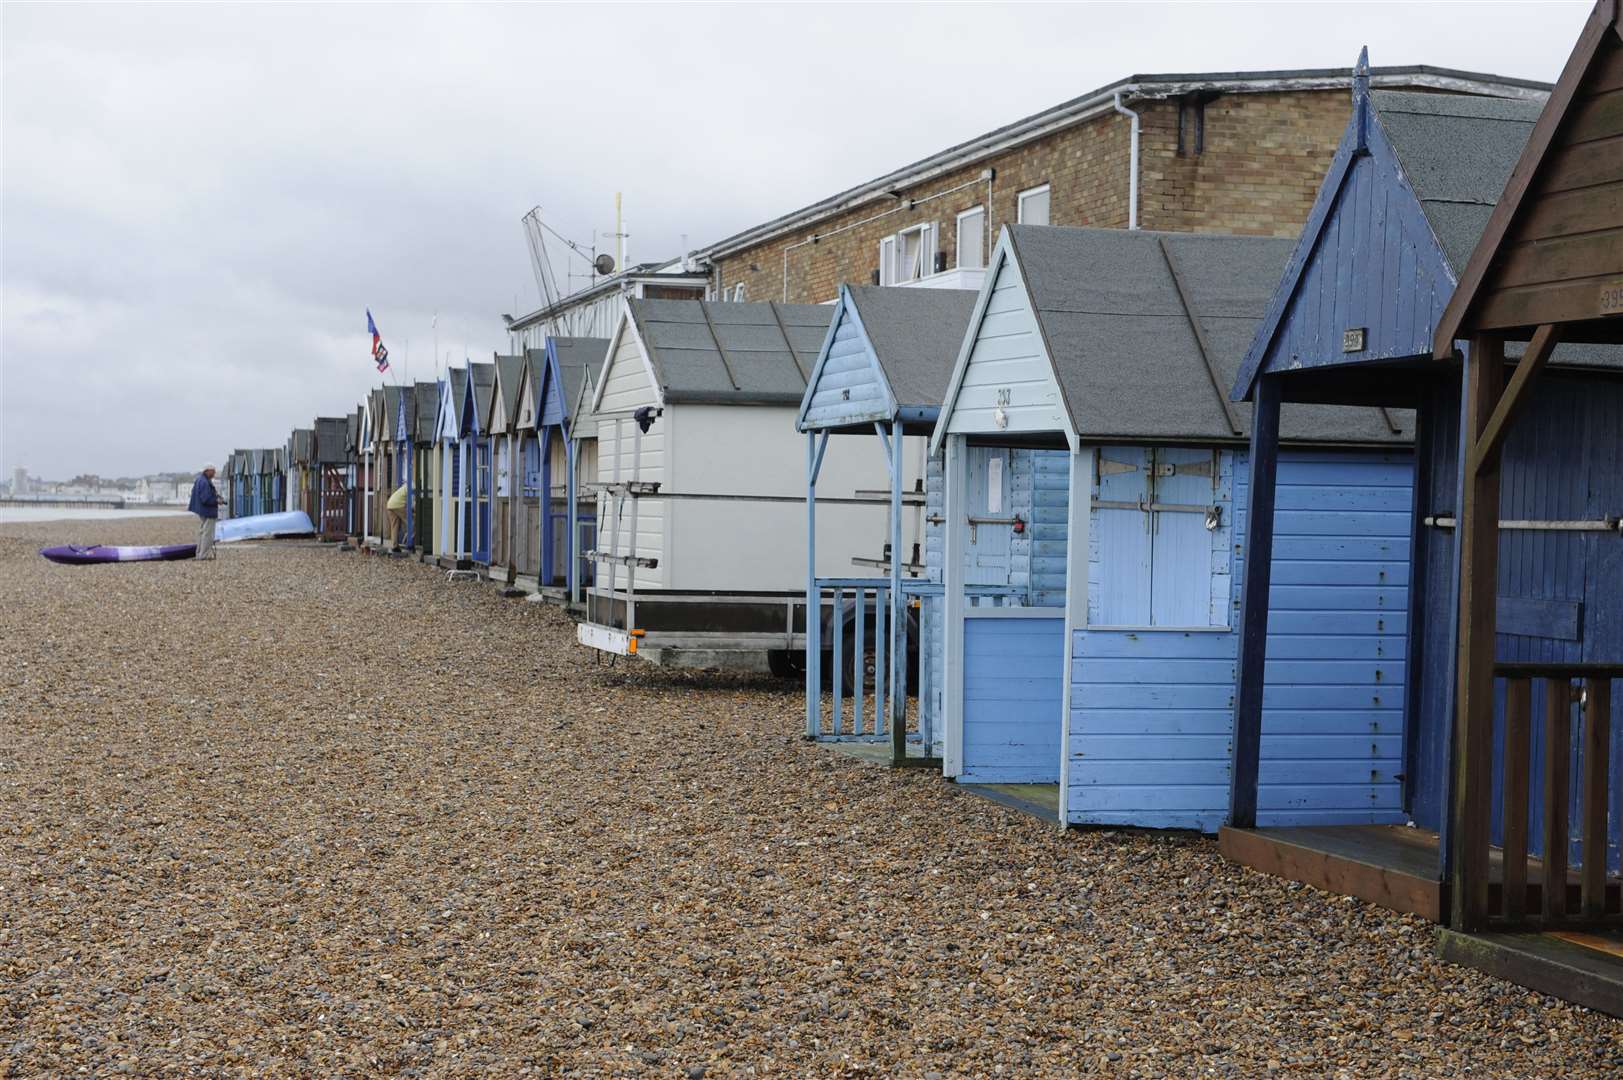 Officers received reports that there had been six beach hut break-ins in the area over the weekend